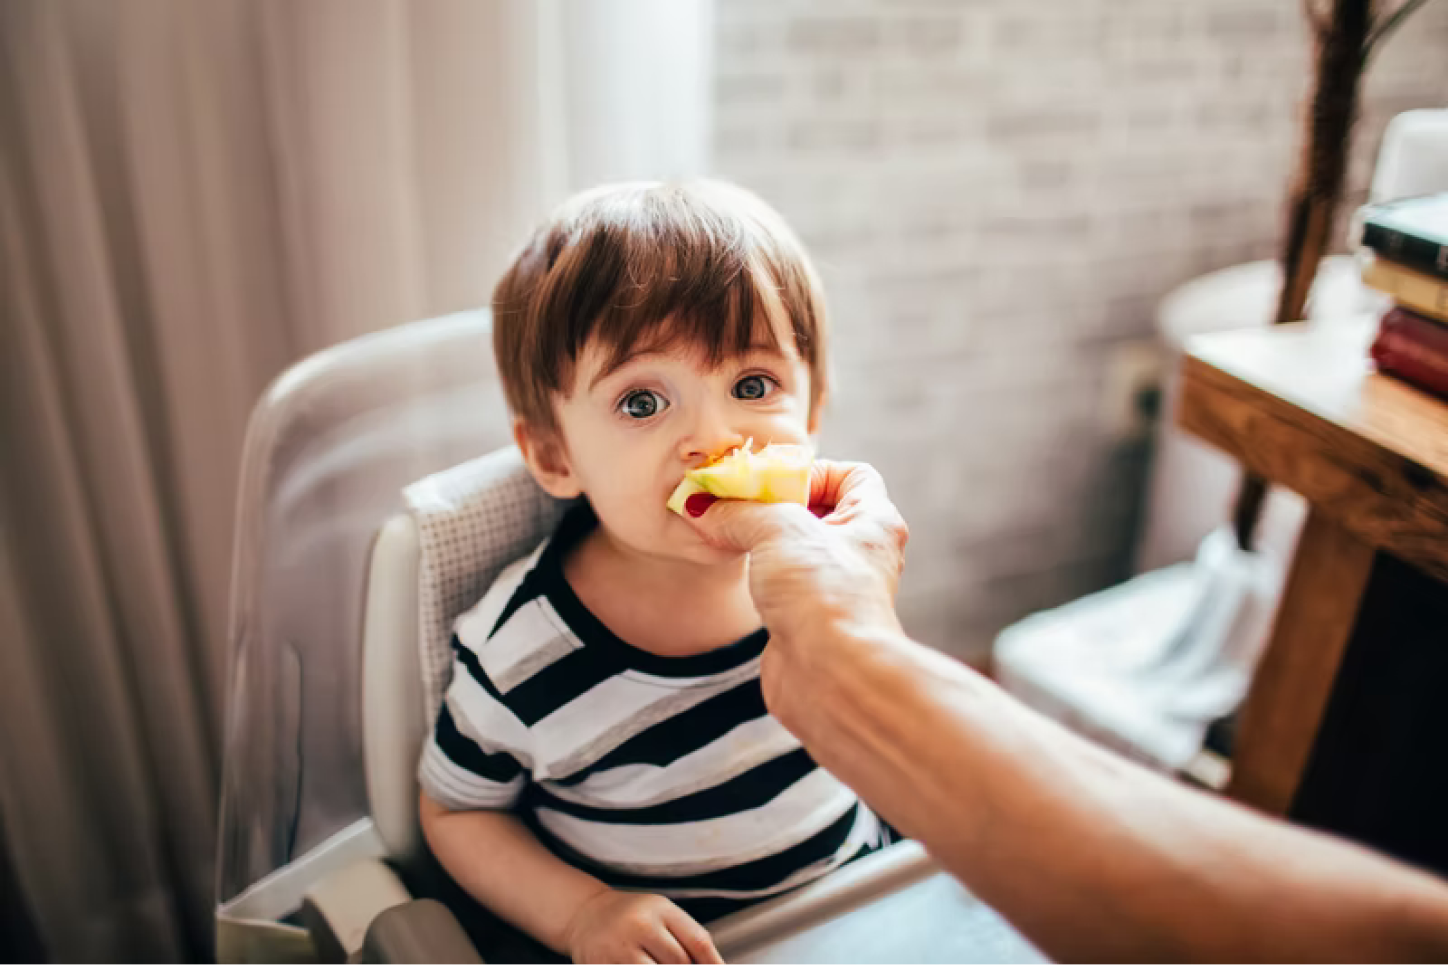 I’m not happy with what my former spouse feeds the children – can I make them change?